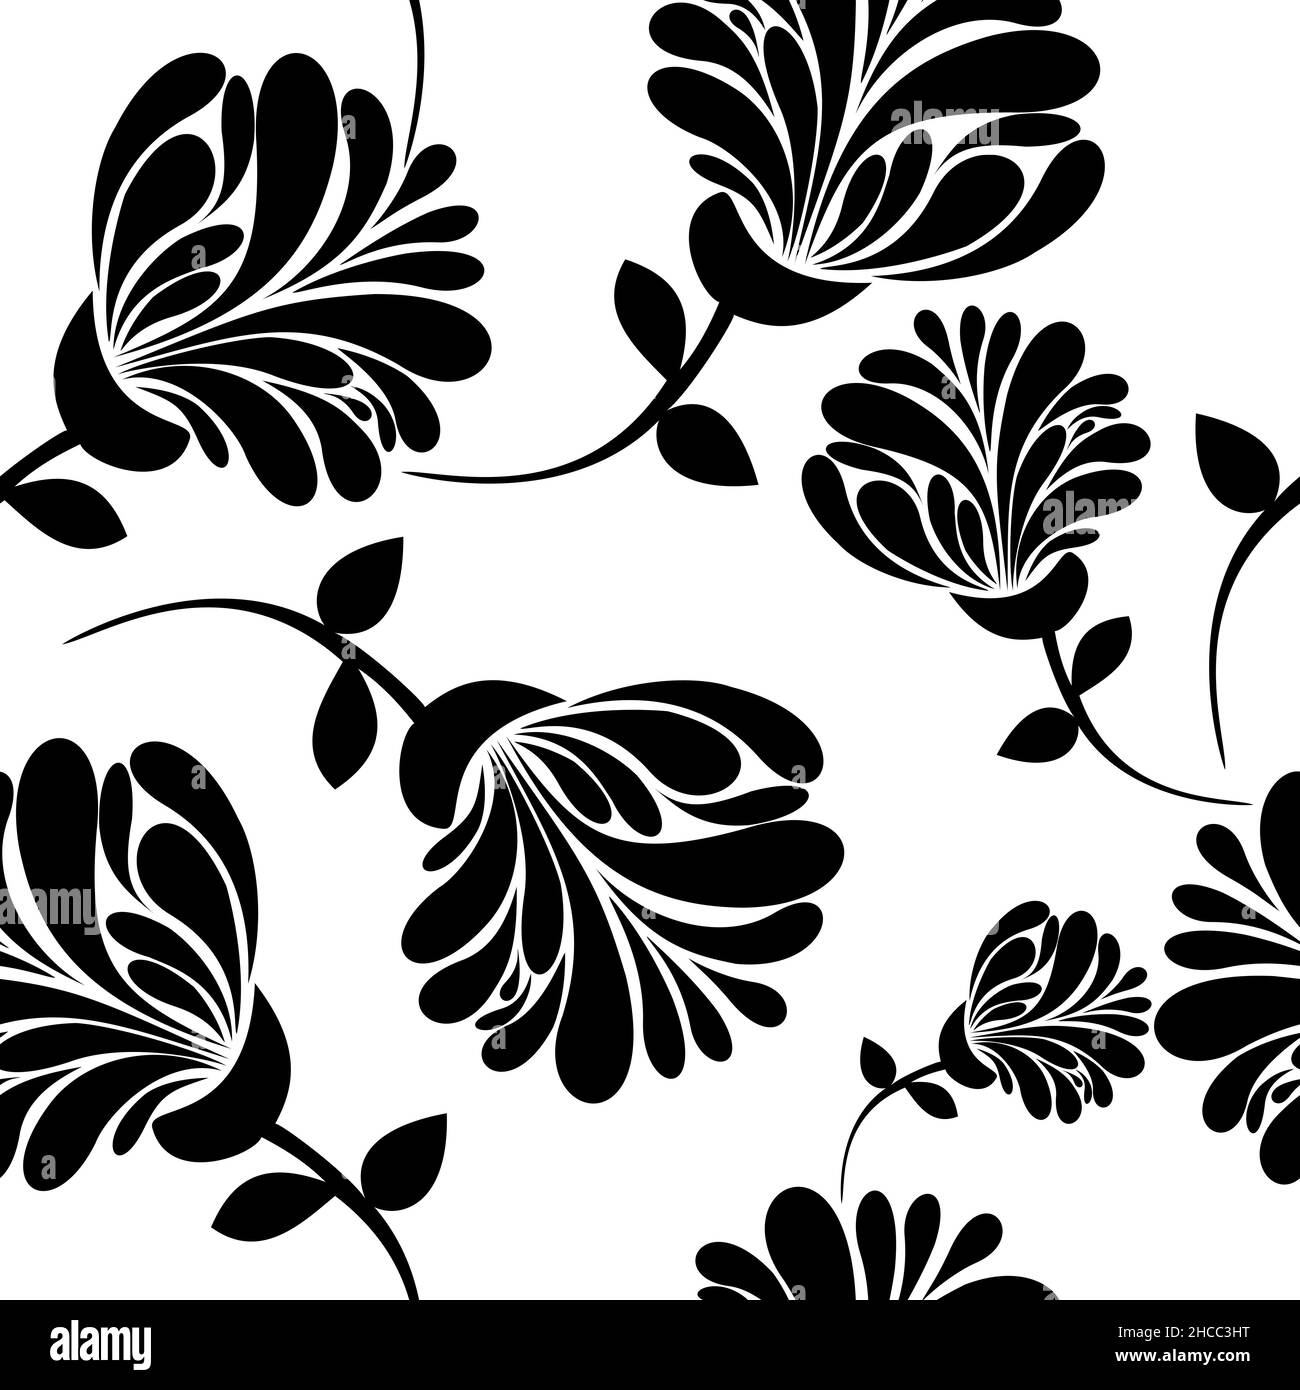 Modern cryshanthemum seamless pattern for your design.cryshanthemum illustration.print on paper or textile.for wallpaper and background Stock Photo